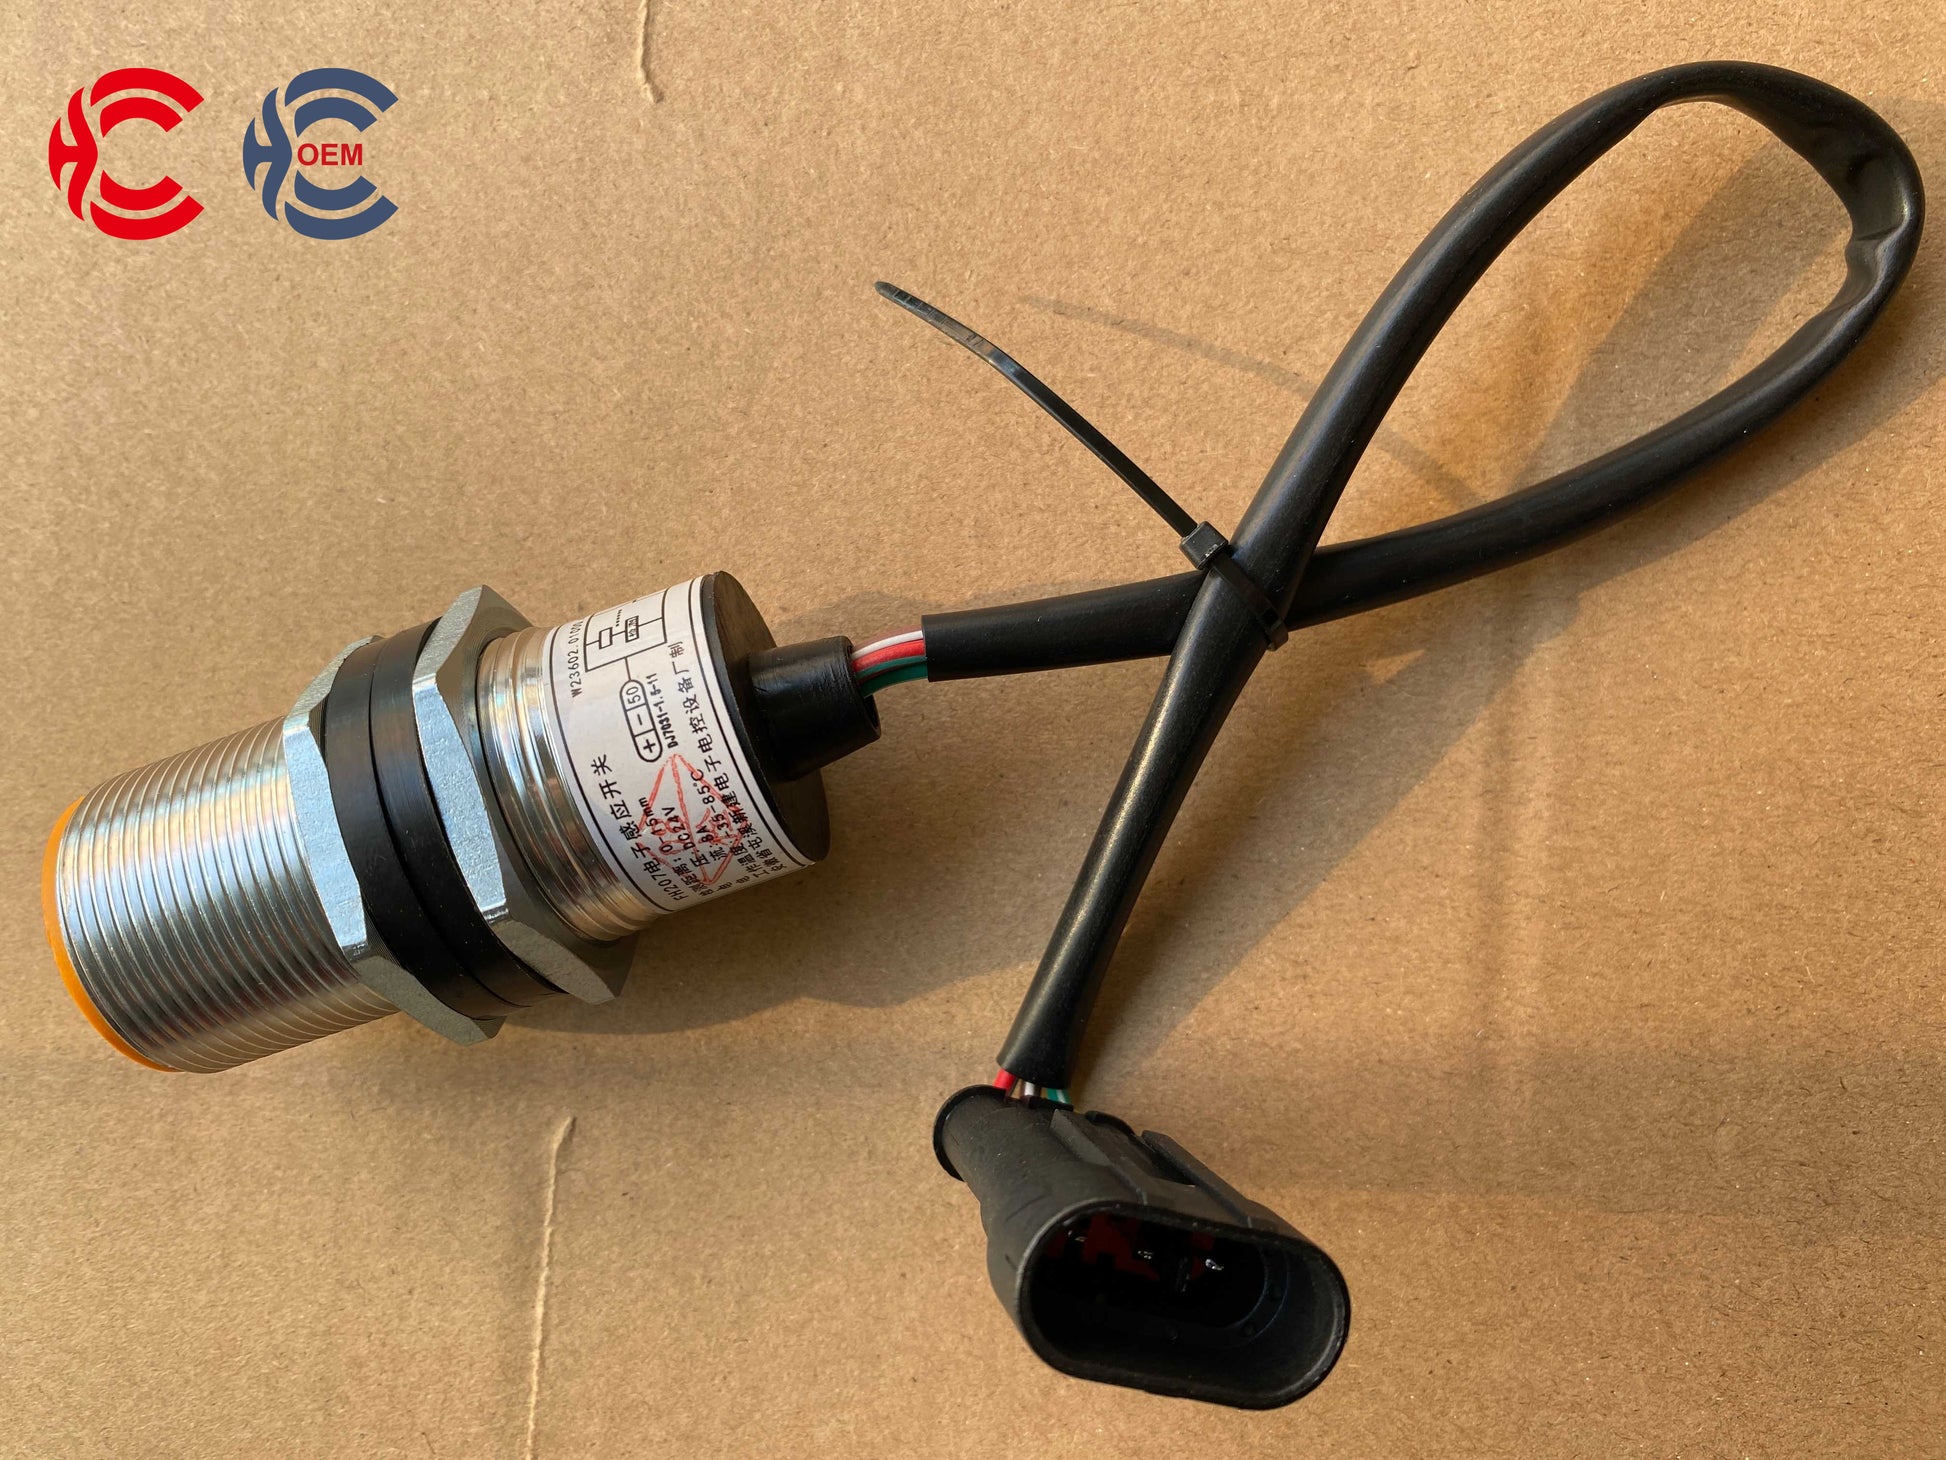 OEM: FH207 W23602.01000.41WMaterial: ABS MetalColor: Black SilverOrigin: Made in ChinaWeight: 100gPacking List: 1* Rear Door Proximity Switch More ServiceWe can provide OEM Manufacturing serviceWe can Be your one-step solution for Auto PartsWe can provide technical scheme for you Feel Free to Contact Us, We will get back to you as soon as possible.